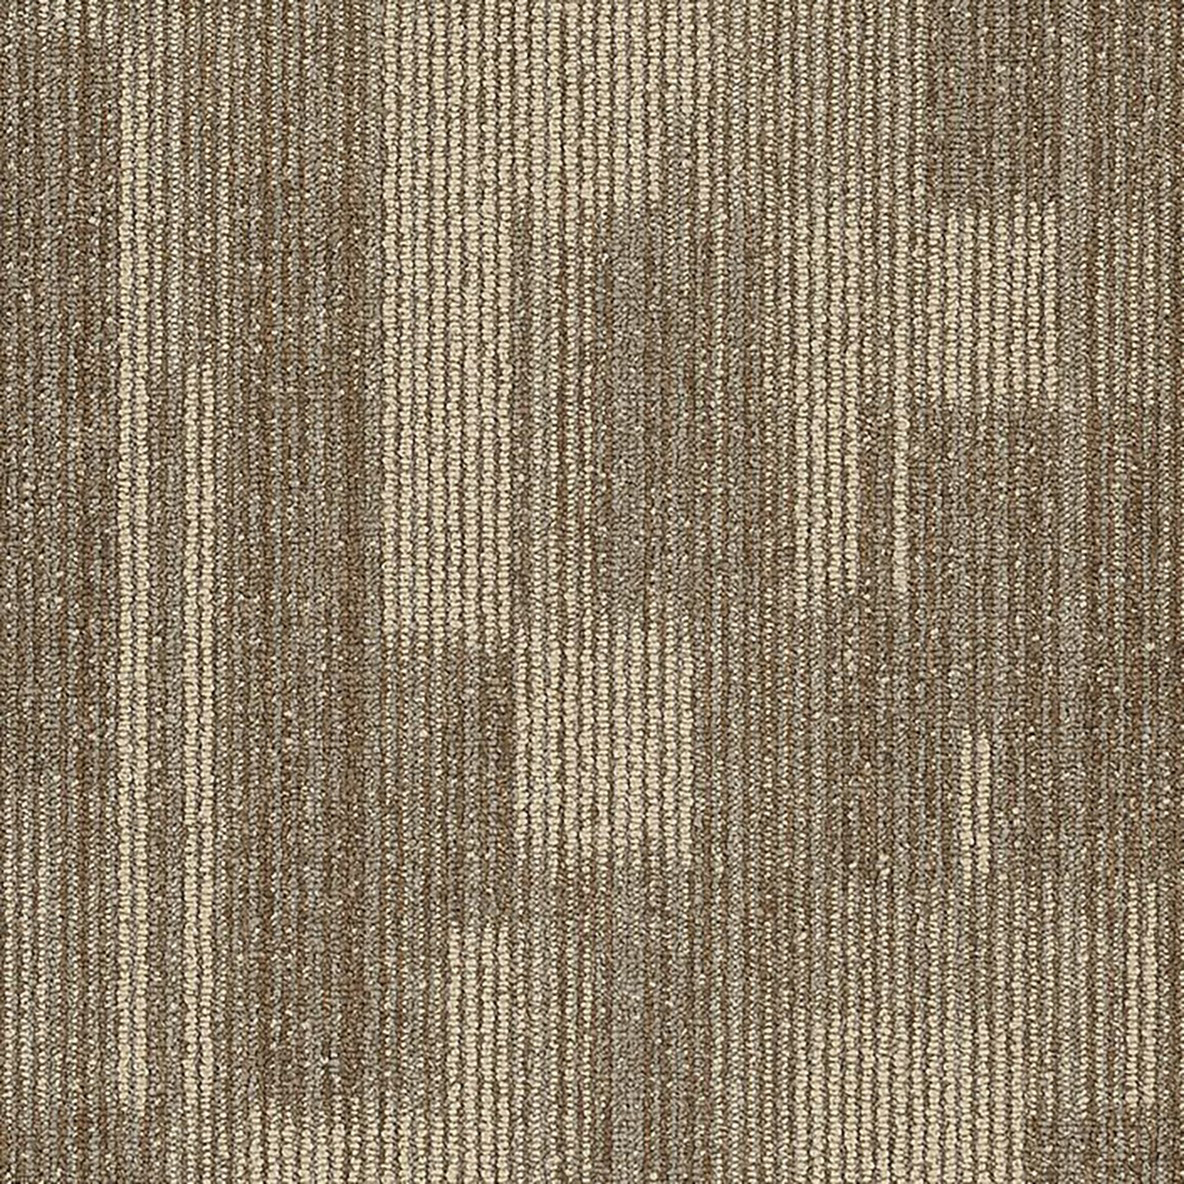 Point of View Commercial Carpet Plank .27 Inch x 18x36 Inches 10 per Carton Ingenious color close up